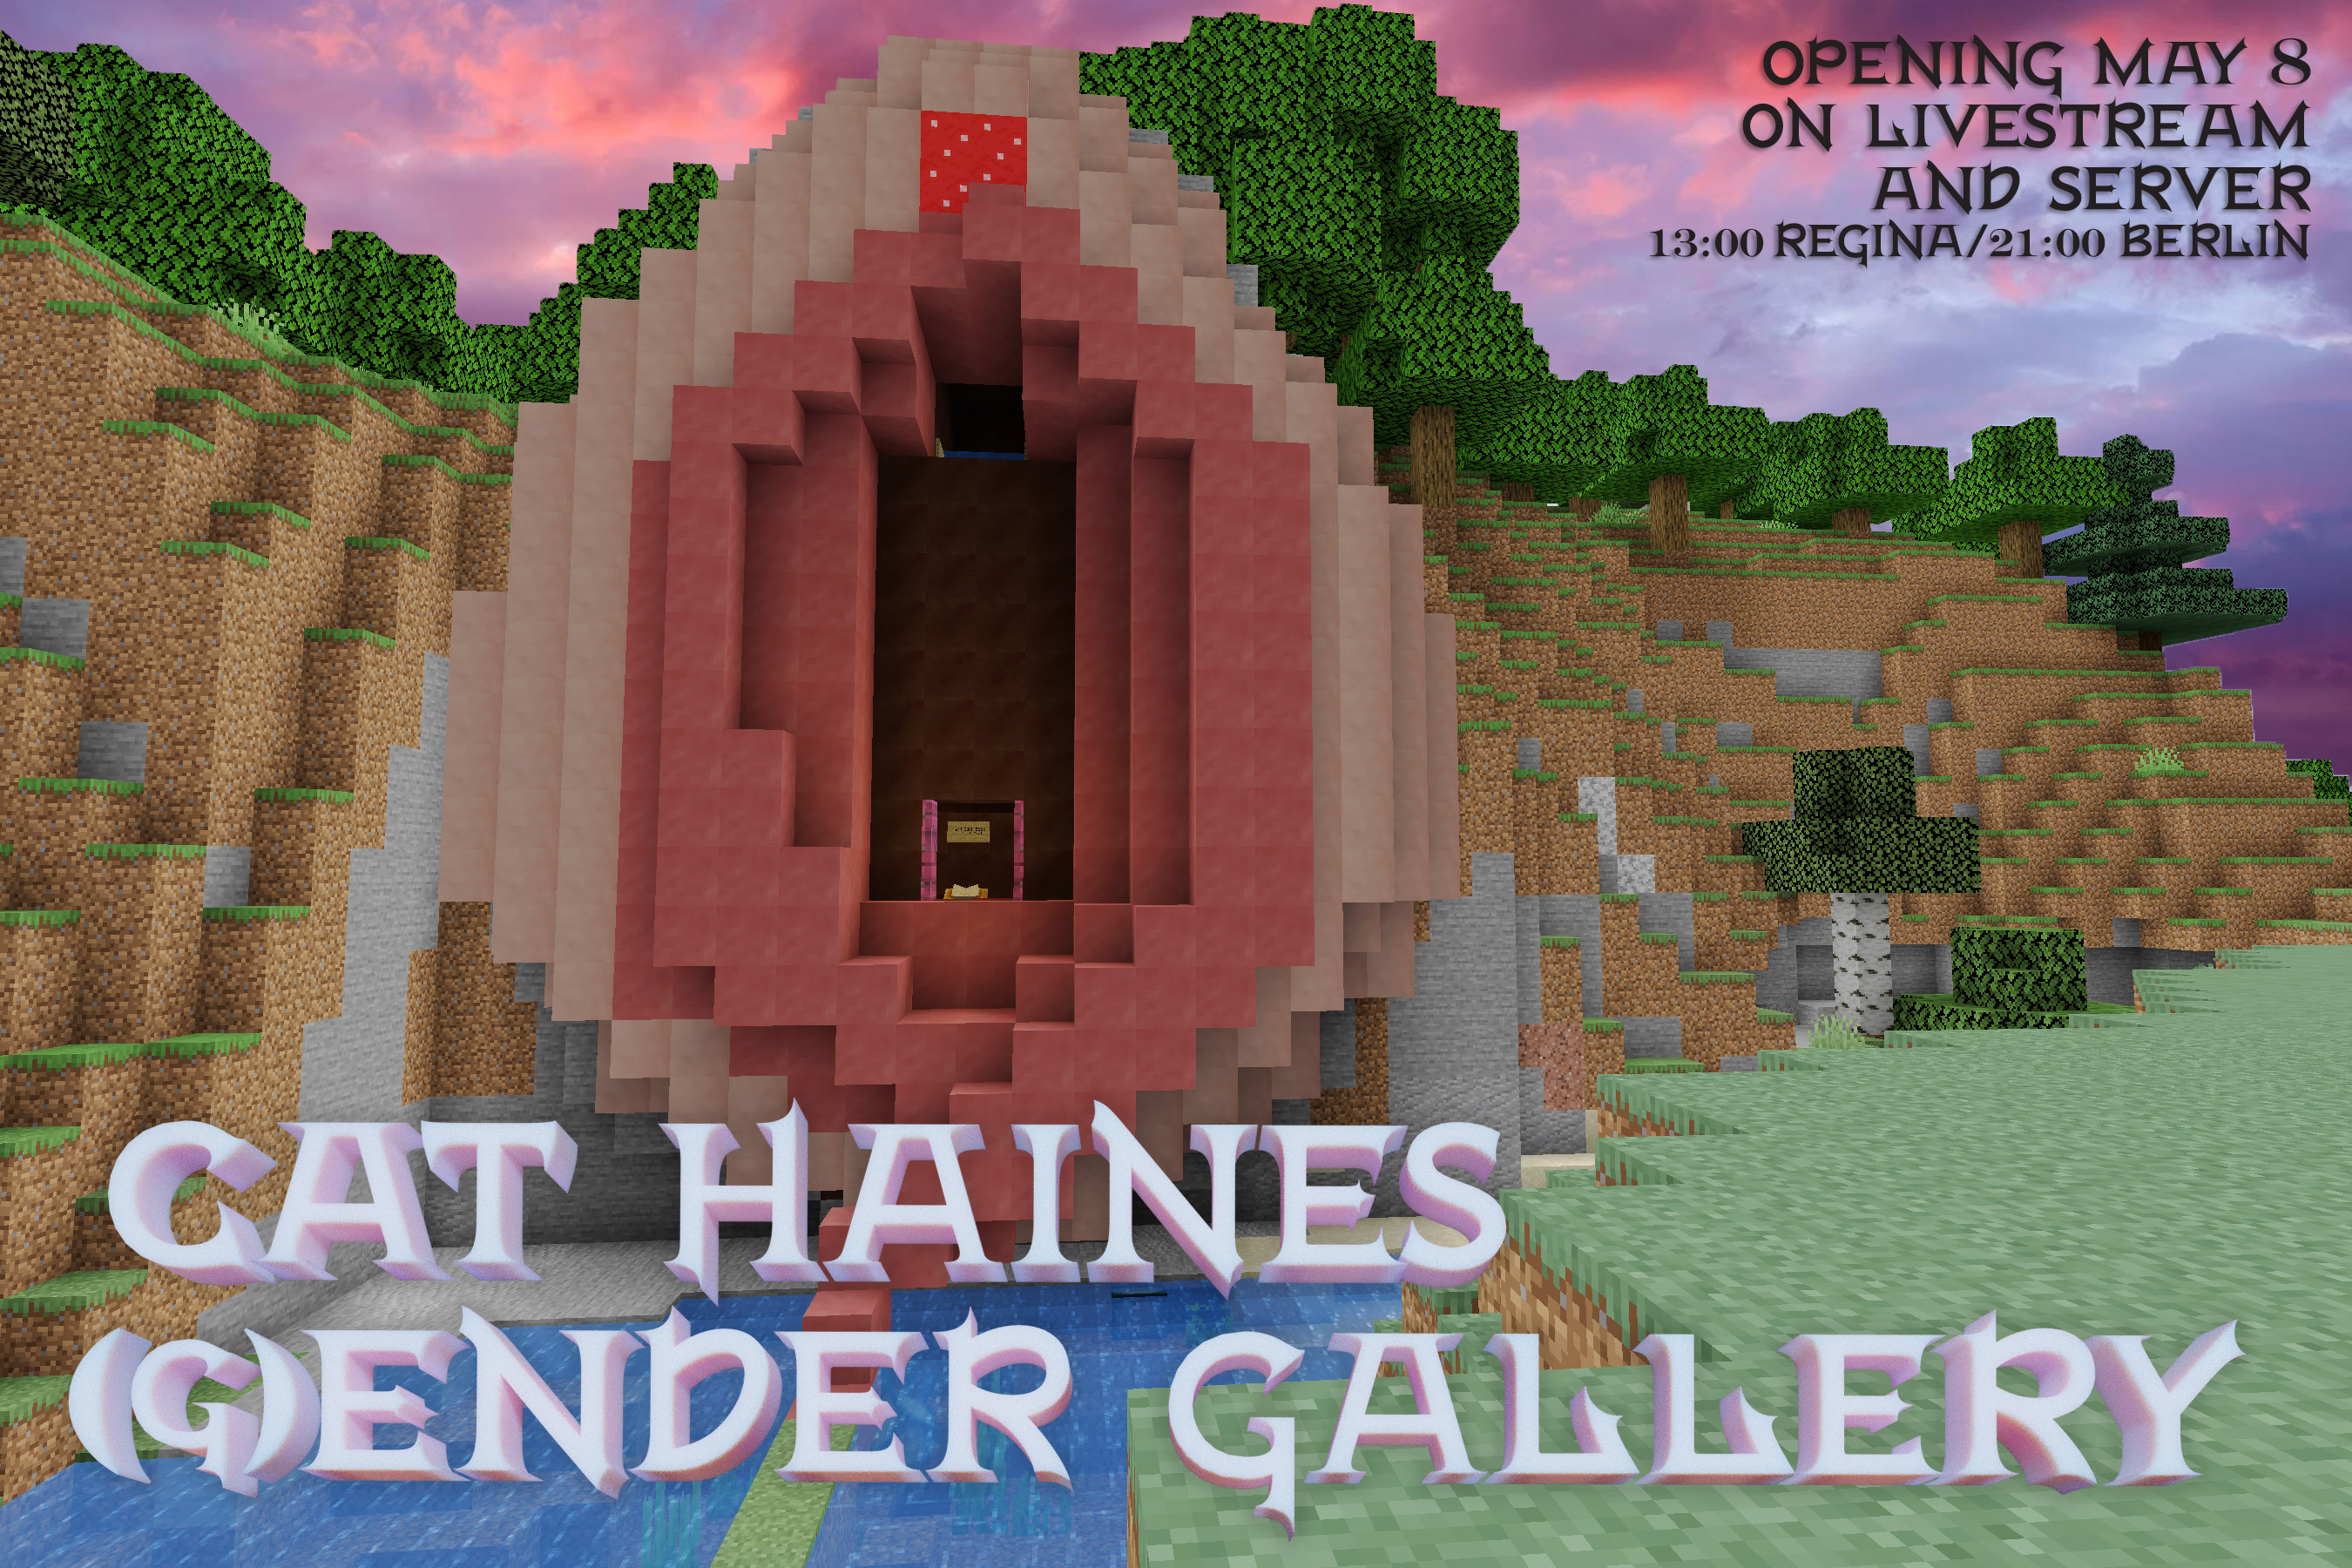 Flyer for the (g)Ender Gallery opening, showing the entrance to the art gallery/reconstruction of Haines's vulva and vagina in Minecraft in front of a pink sunset, with exhibition opening details in text superimposed